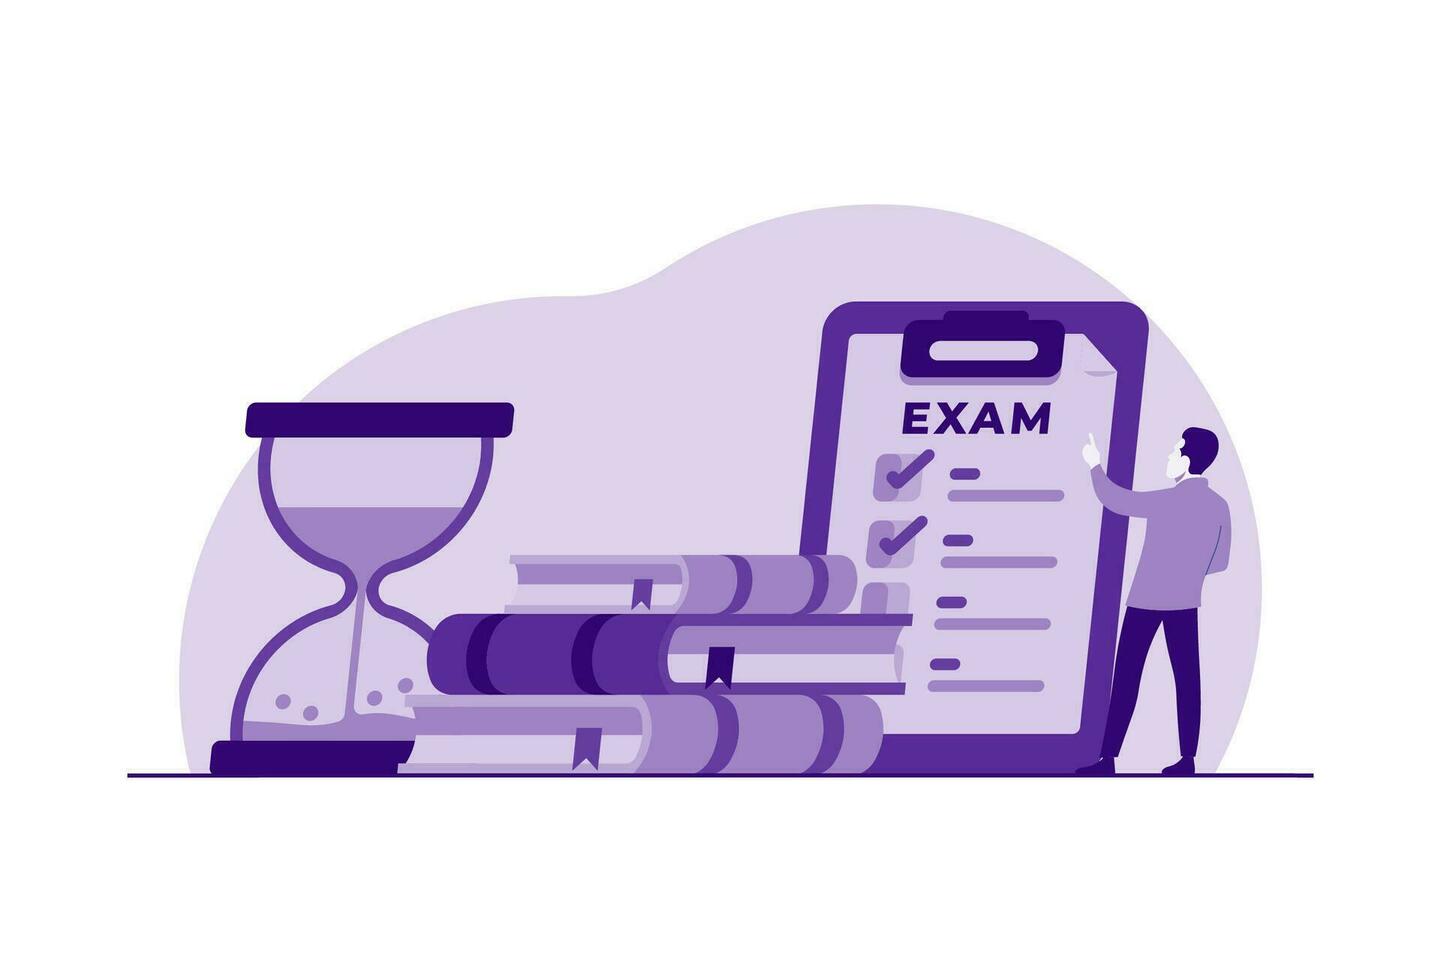 Exam concept, Examination, Test, Checklist, Student facing examination flat illustration vector template for landing page, mobile app, flyer, template, web banner, infographic